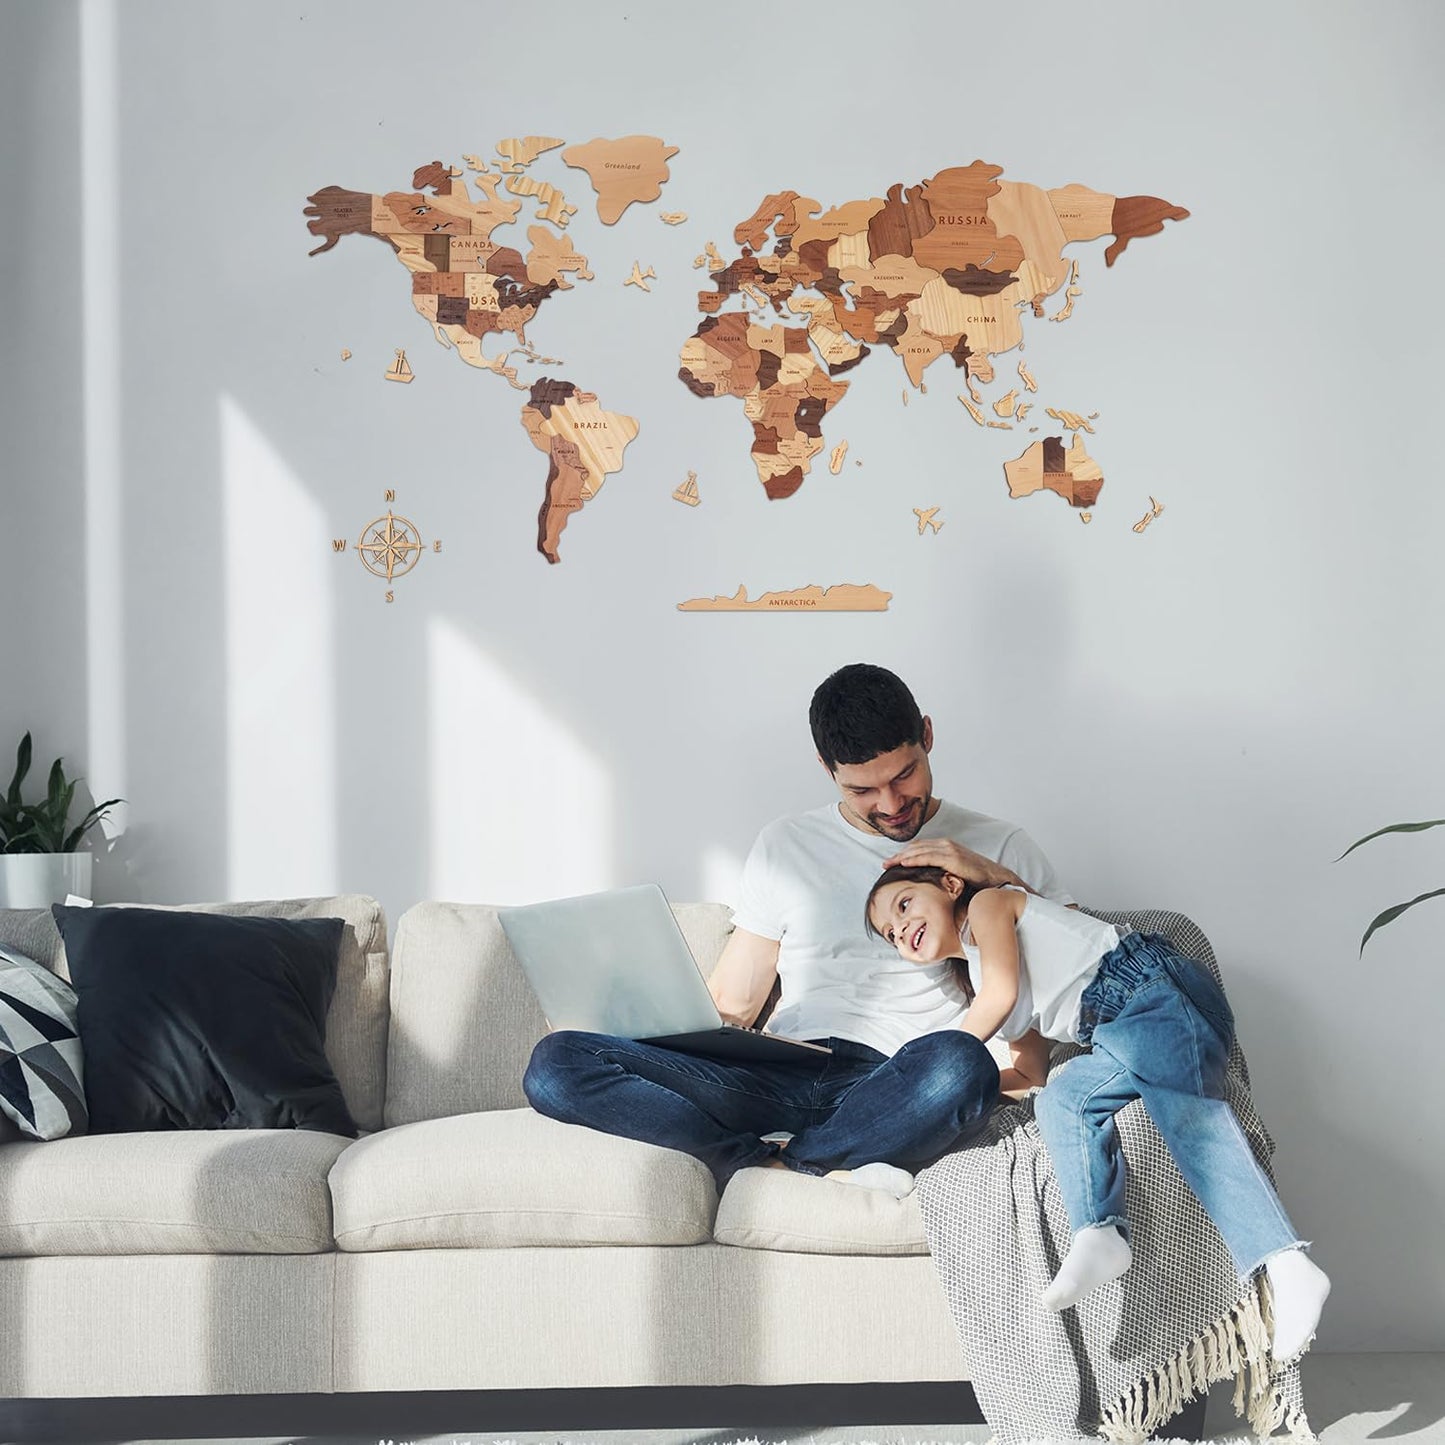 Handiwoo Wooden World Map 3D, Wood World Map Wall Art, Multilayered Wooden Map of The World Wall Decoration, Idea Housewarming Gift Large Wood Travel Map for Home & Office Dcor